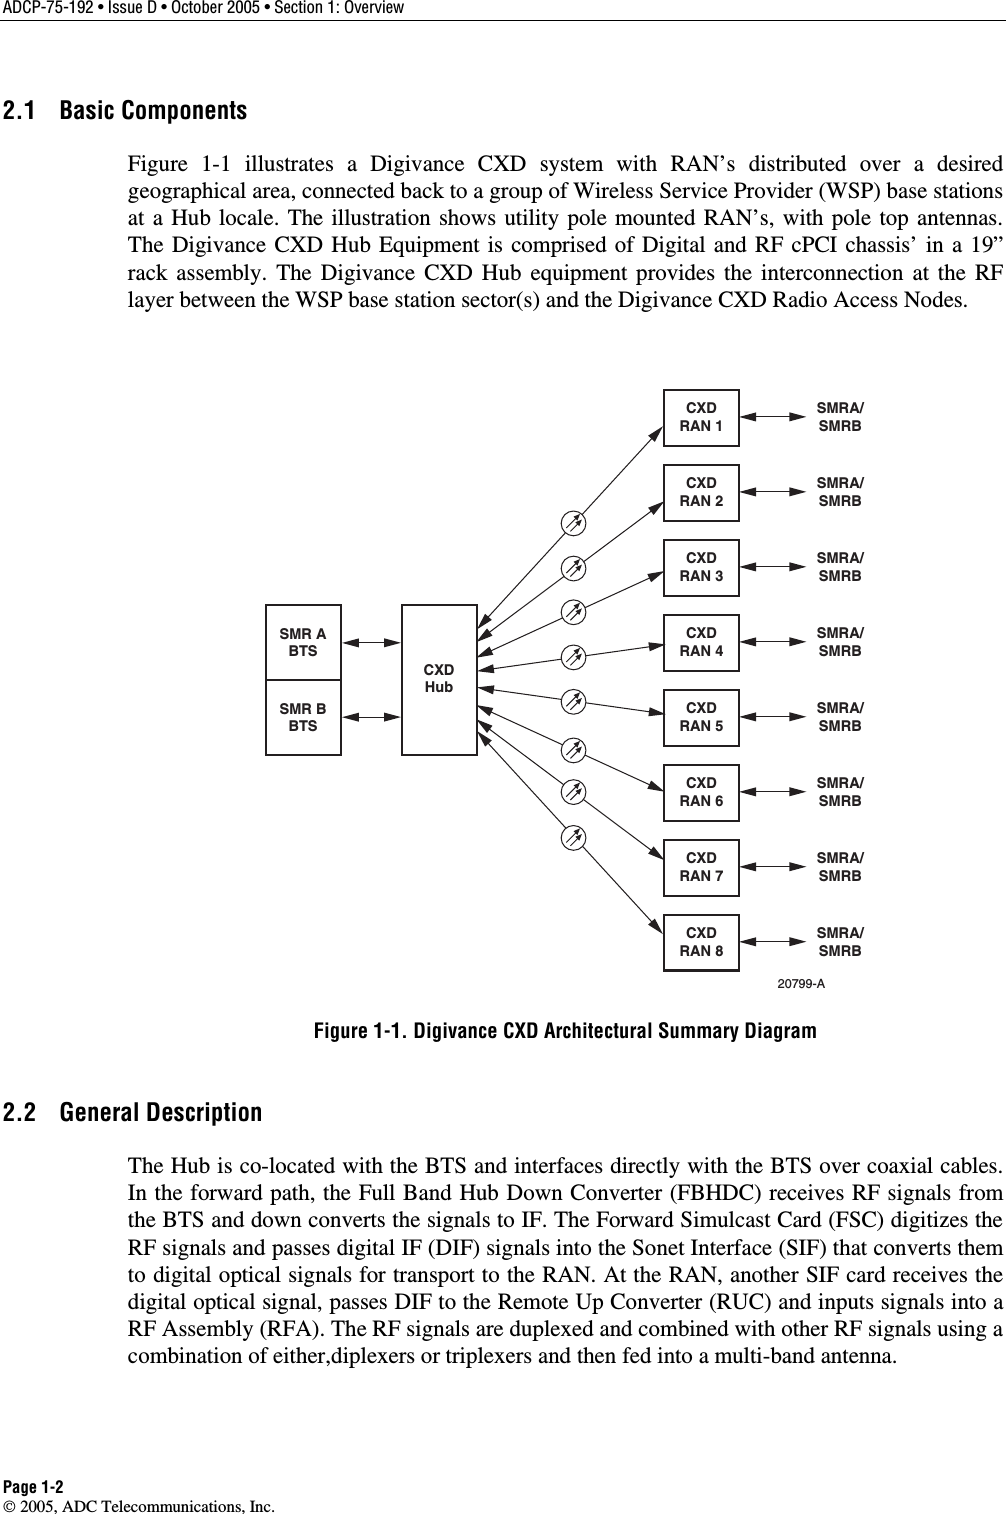 ADCP-75-192 • Issue D • October 2005 • Section 1: Overview Page 1-2  2005, ADC Telecommunications, Inc. 2.1 Basic Components Figure 1-1 illustrates a Digivance CXD system with RAN’s distributed over a desired geographical area, connected back to a group of Wireless Service Provider (WSP) base stations at a Hub locale. The illustration shows utility pole mounted RAN’s, with pole top antennas. The Digivance CXD Hub Equipment is comprised of Digital and RF cPCI chassis’ in a 19” rack assembly. The Digivance CXD Hub equipment provides the interconnection at the RF layer between the WSP base station sector(s) and the Digivance CXD Radio Access Nodes.  CXDRAN 1SMRA/SMRBCXDRAN 2SMRA/SMRBCXDRAN 3SMRA/SMRBCXDRAN 4SMRA/SMRBCXDRAN 5SMRA/SMRBCXDRAN 6SMRA/SMRBCXDRAN 7SMRA/SMRBCXDRAN 8SMRA/SMRBSMR ABTSCXDHubSMR BBTS20799-A Figure 1-1. Digivance CXD Architectural Summary Diagram 2.2 General Description The Hub is co-located with the BTS and interfaces directly with the BTS over coaxial cables. In the forward path, the Full Band Hub Down Converter (FBHDC) receives RF signals from the BTS and down converts the signals to IF. The Forward Simulcast Card (FSC) digitizes the RF signals and passes digital IF (DIF) signals into the Sonet Interface (SIF) that converts them to digital optical signals for transport to the RAN. At the RAN, another SIF card receives the digital optical signal, passes DIF to the Remote Up Converter (RUC) and inputs signals into a RF Assembly (RFA). The RF signals are duplexed and combined with other RF signals using a combination of either,diplexers or triplexers and then fed into a multi-band antenna.  